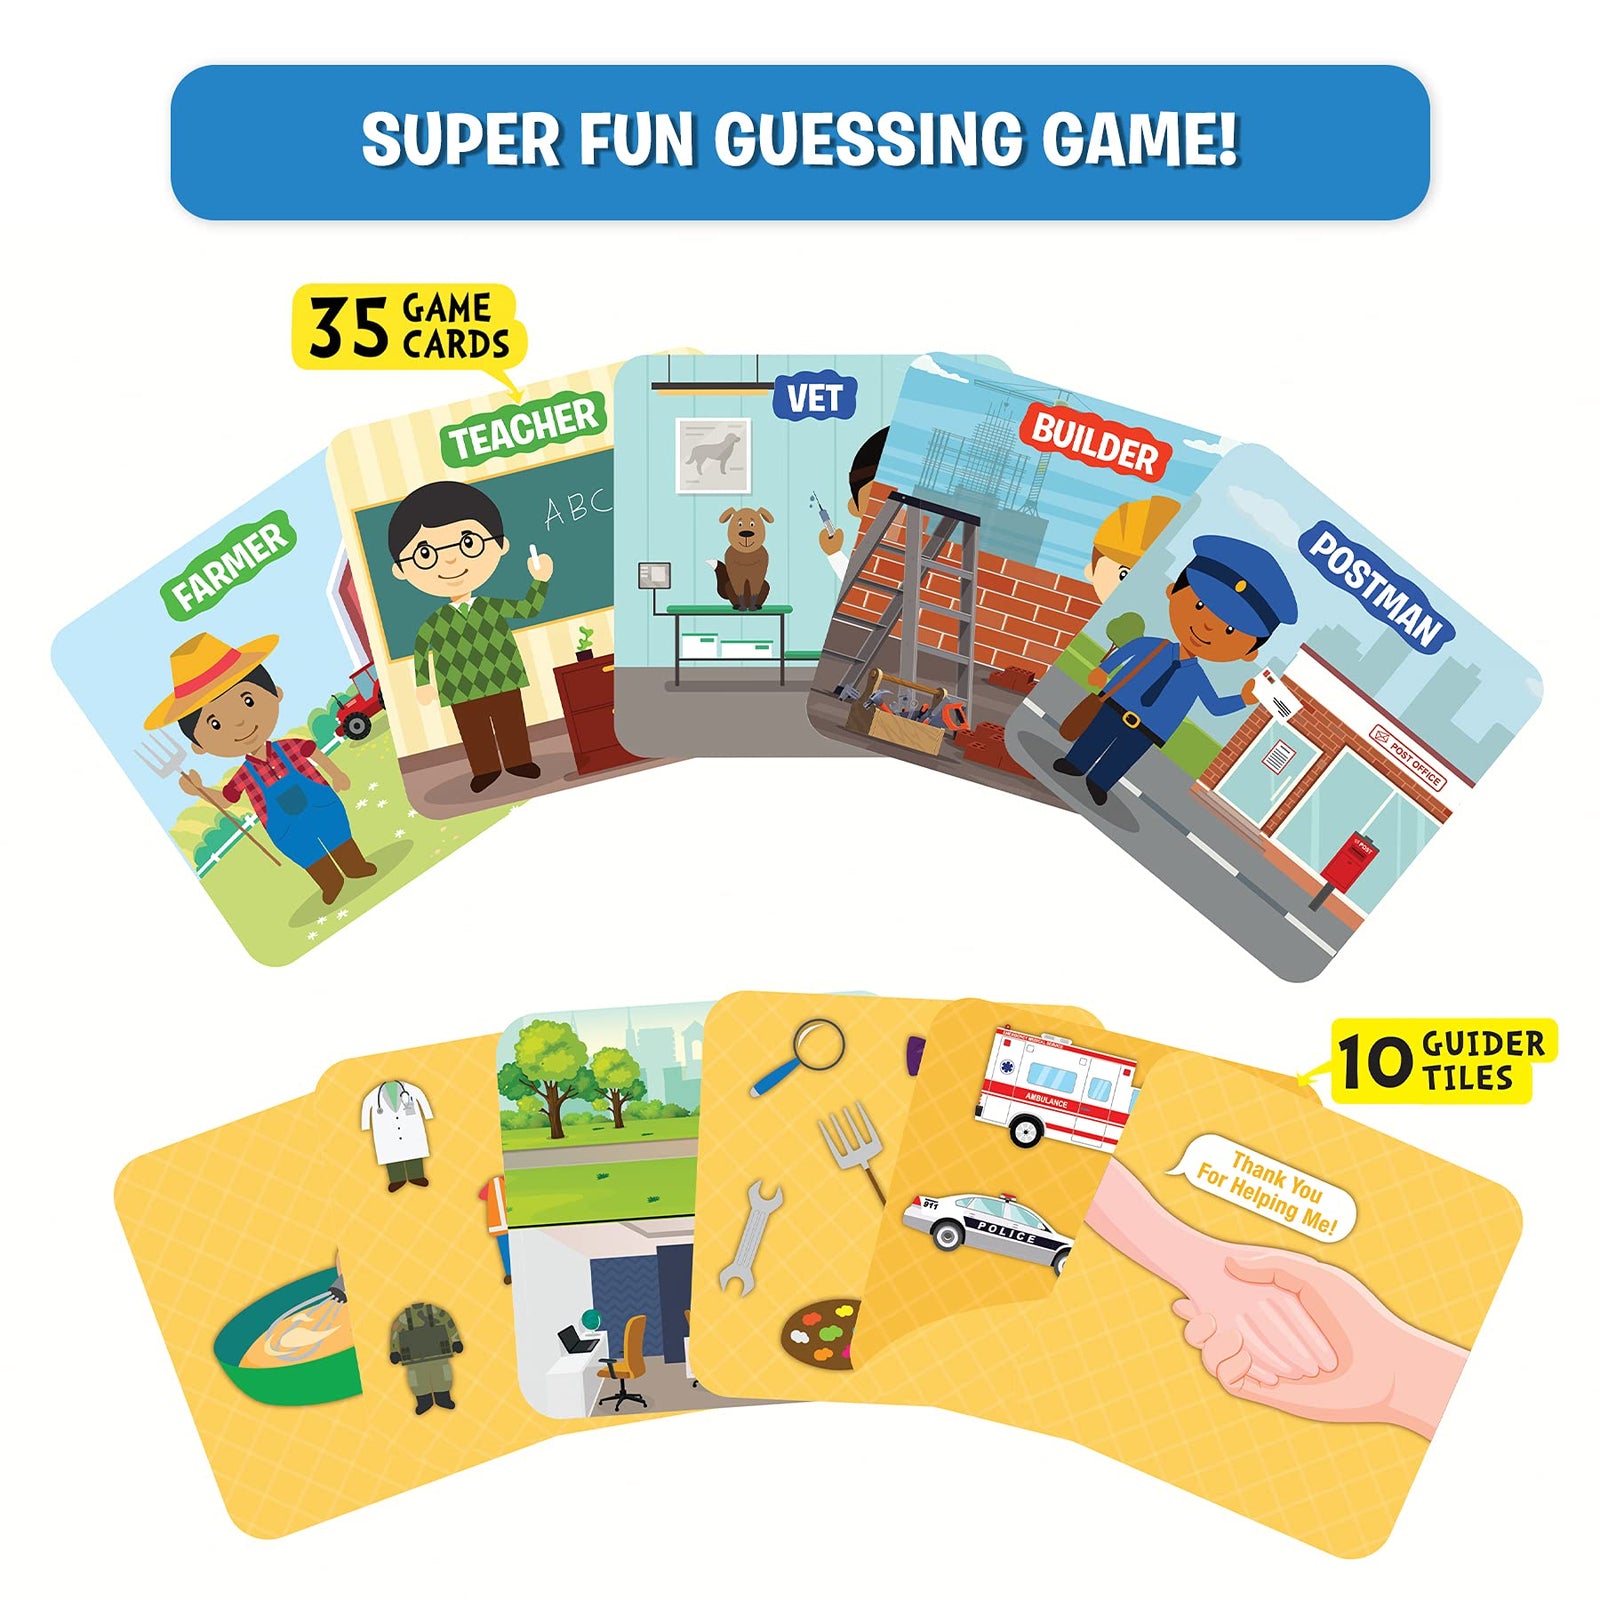 Skillmatics Card Game : Guess in 10 Animal Planet | Gifts for Ages 6 and Up | Super Fun for Travel & Family Game Night